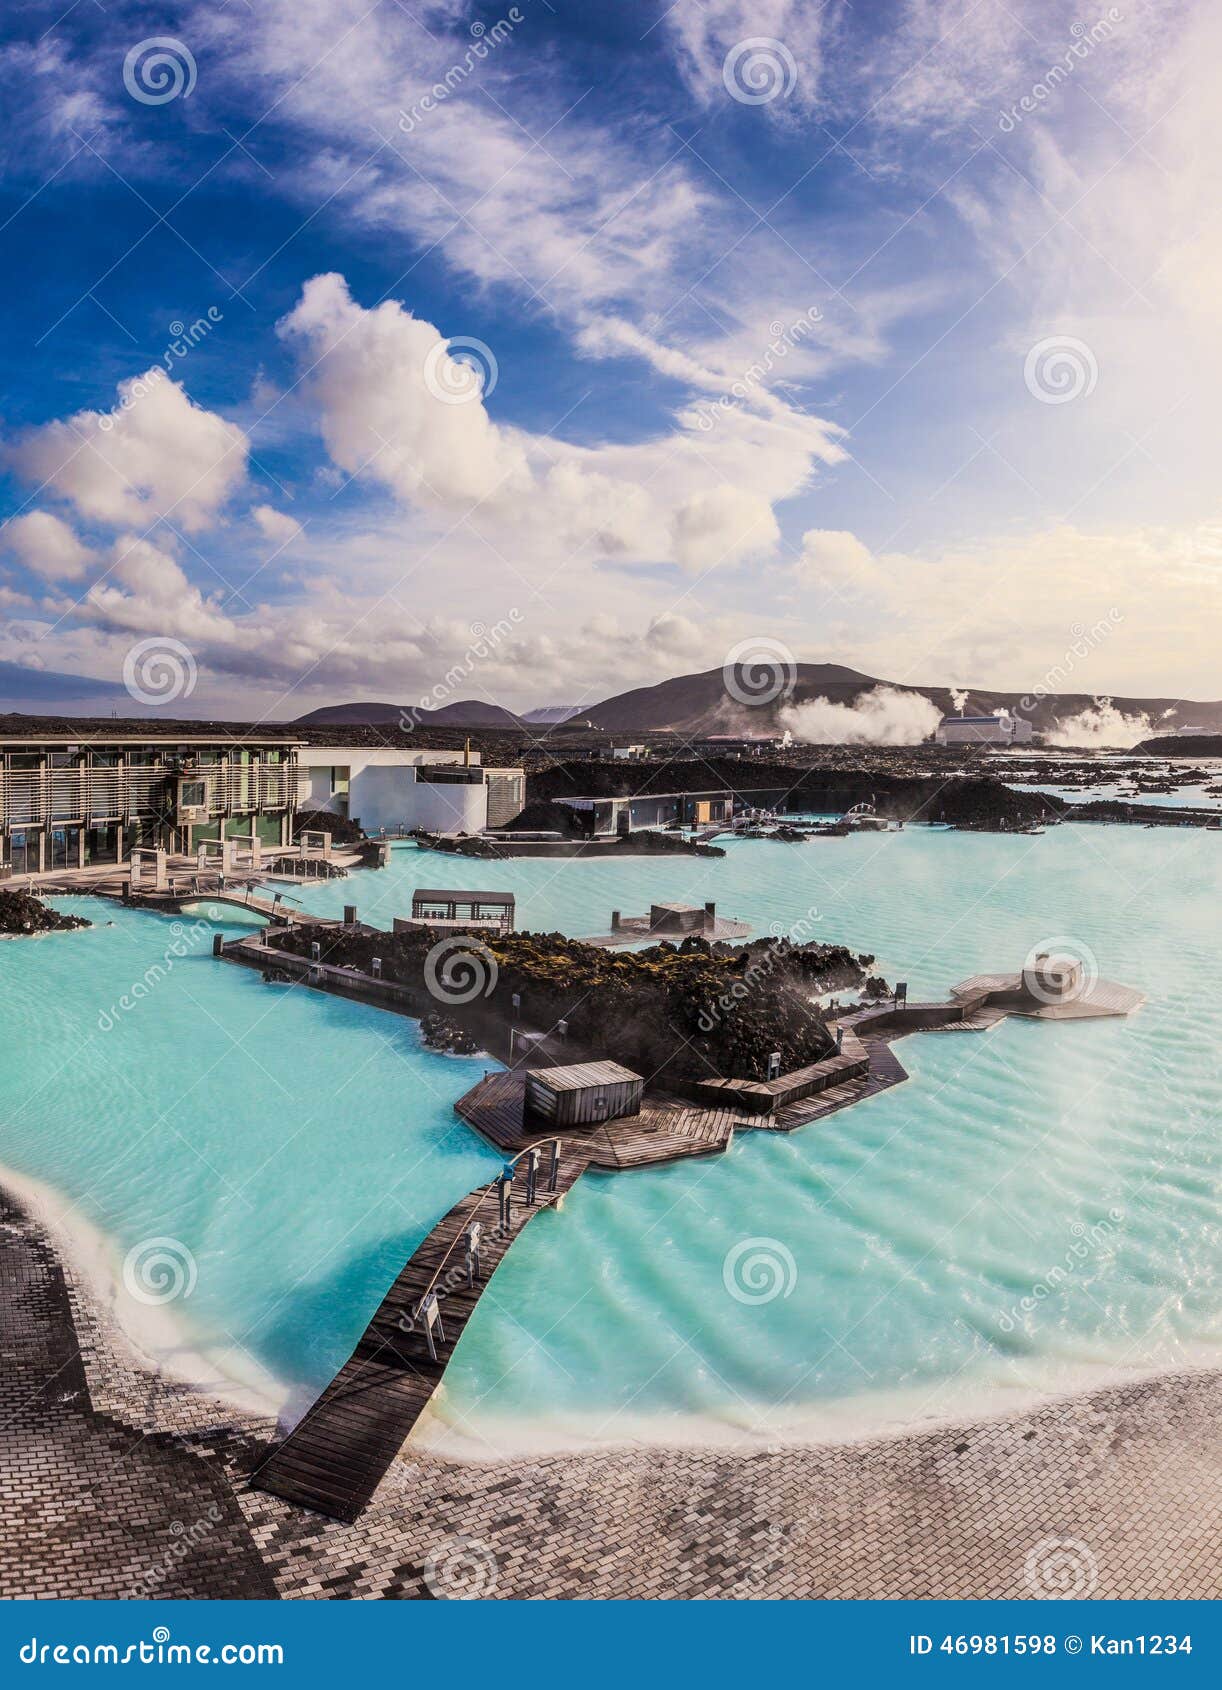 Blue Lagoon Outdoor Geothermal Pool Iceland Stock Photo Image Of